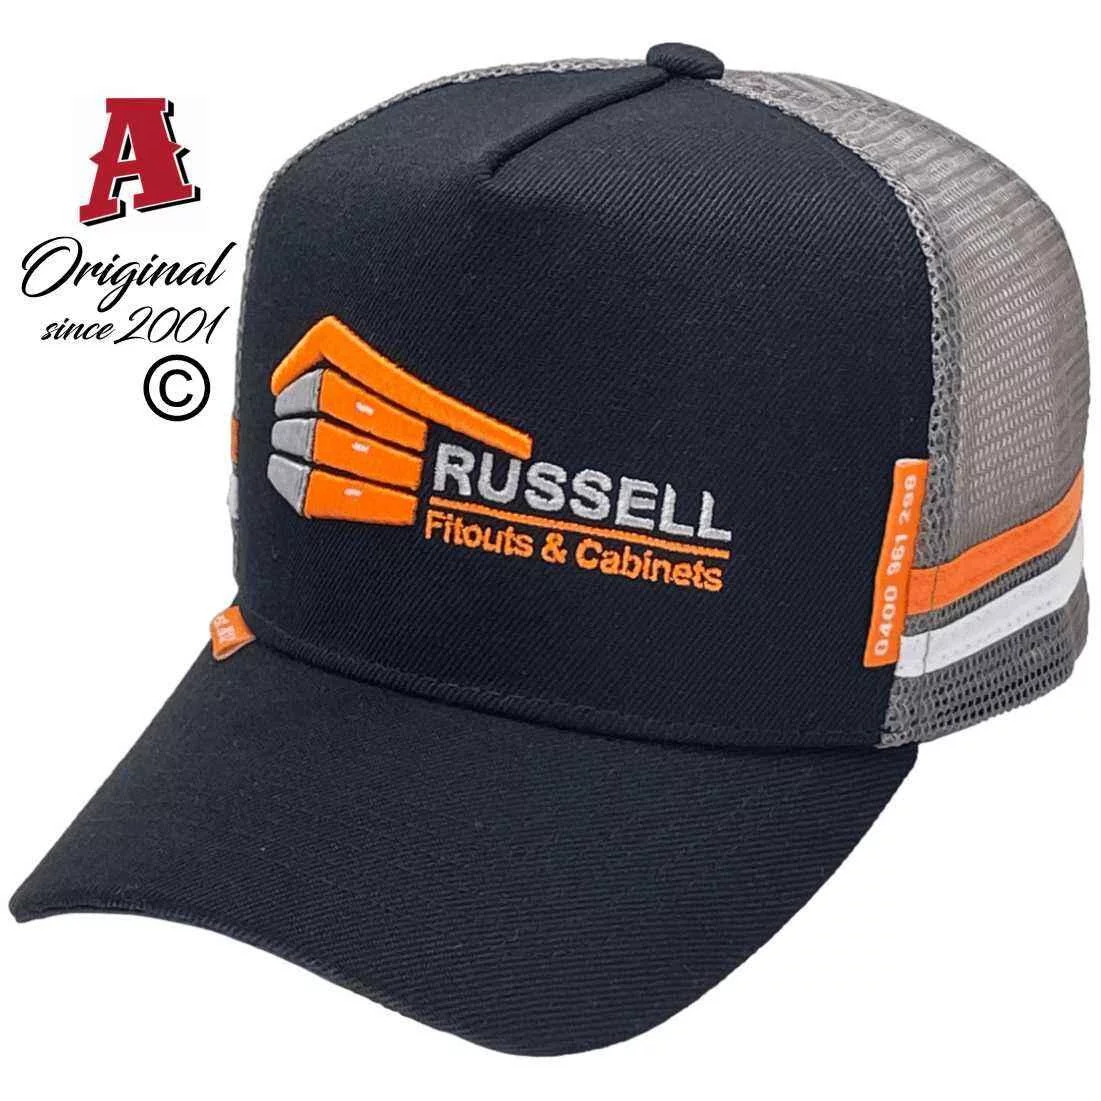 Russell Fitouts & Cabinets Brendale QLD Midrange Aussie Trucker Hats with Double SideBands and Australian HeadFit Crown  black orange White